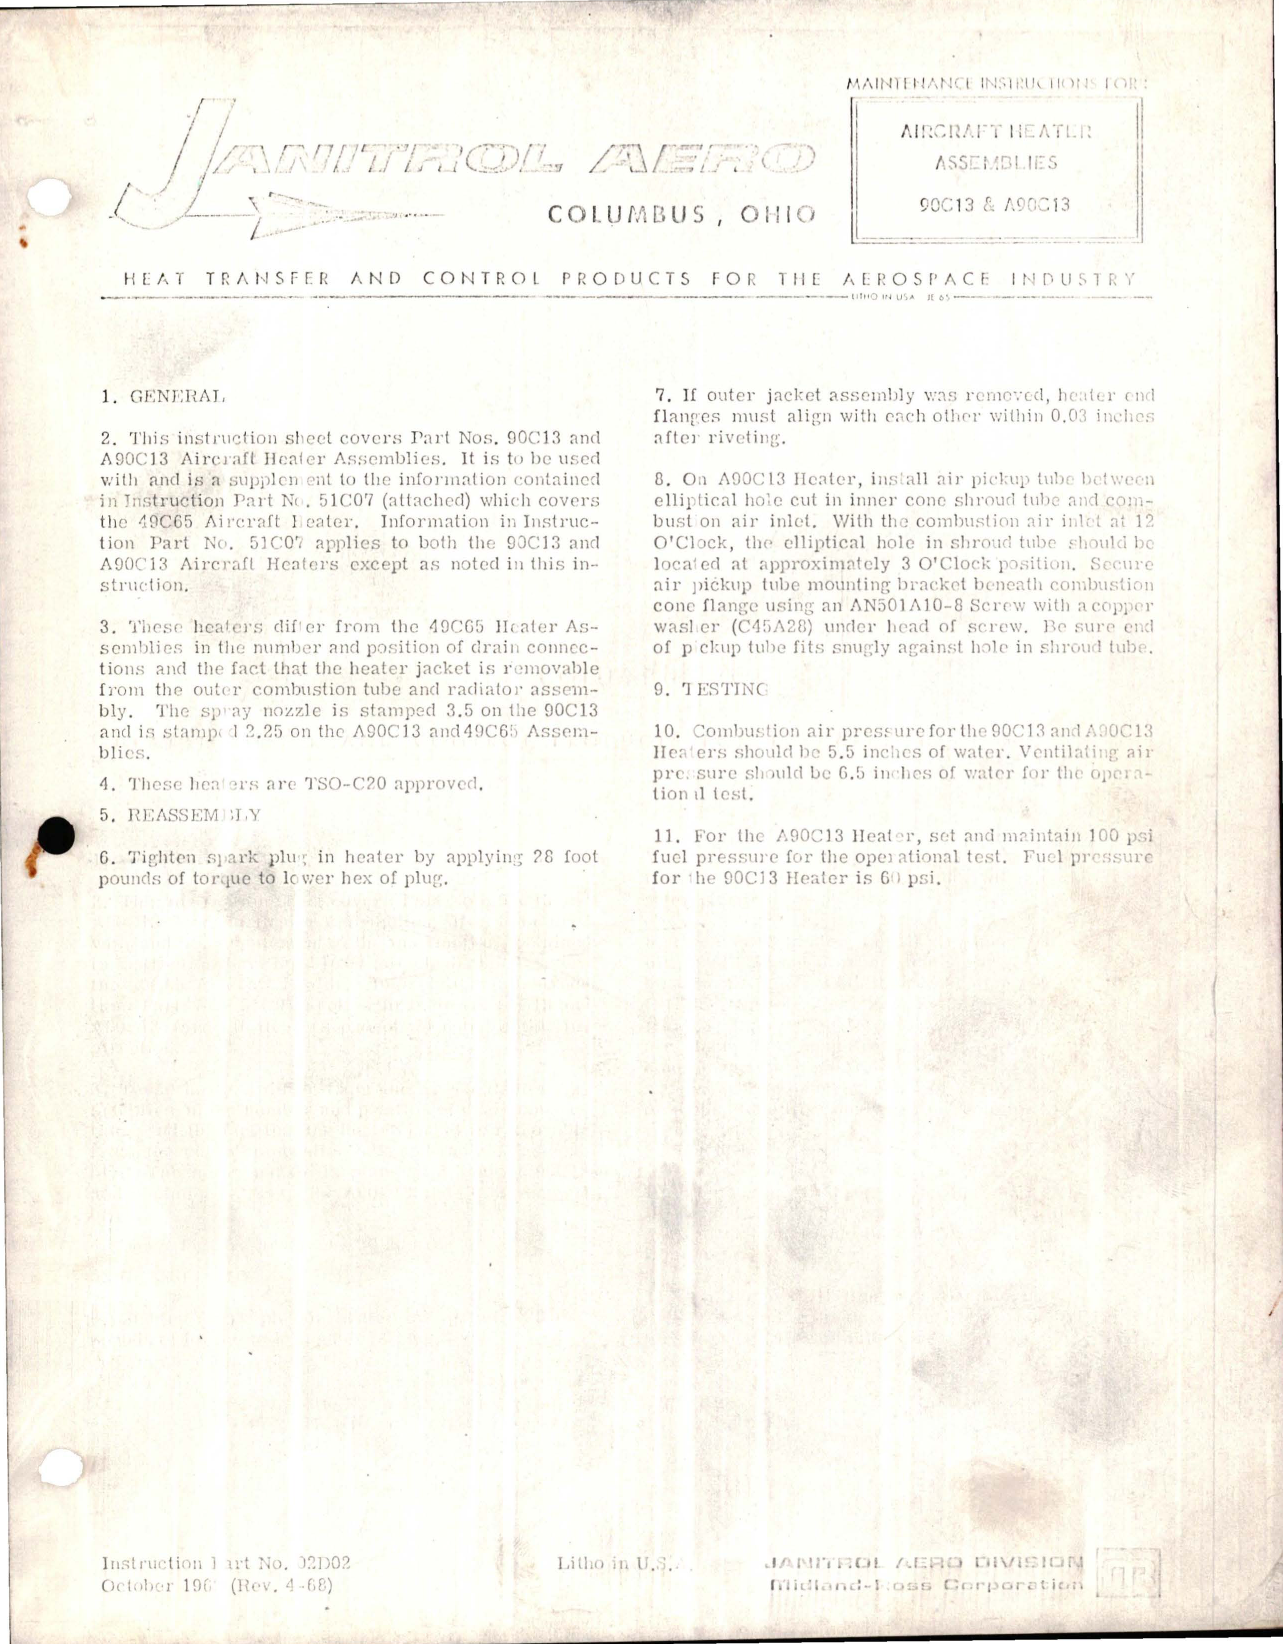 Sample page 1 from AirCorps Library document: Maintenance Instructions for Aircraft Heater Assembly - 90C13 and A90C13